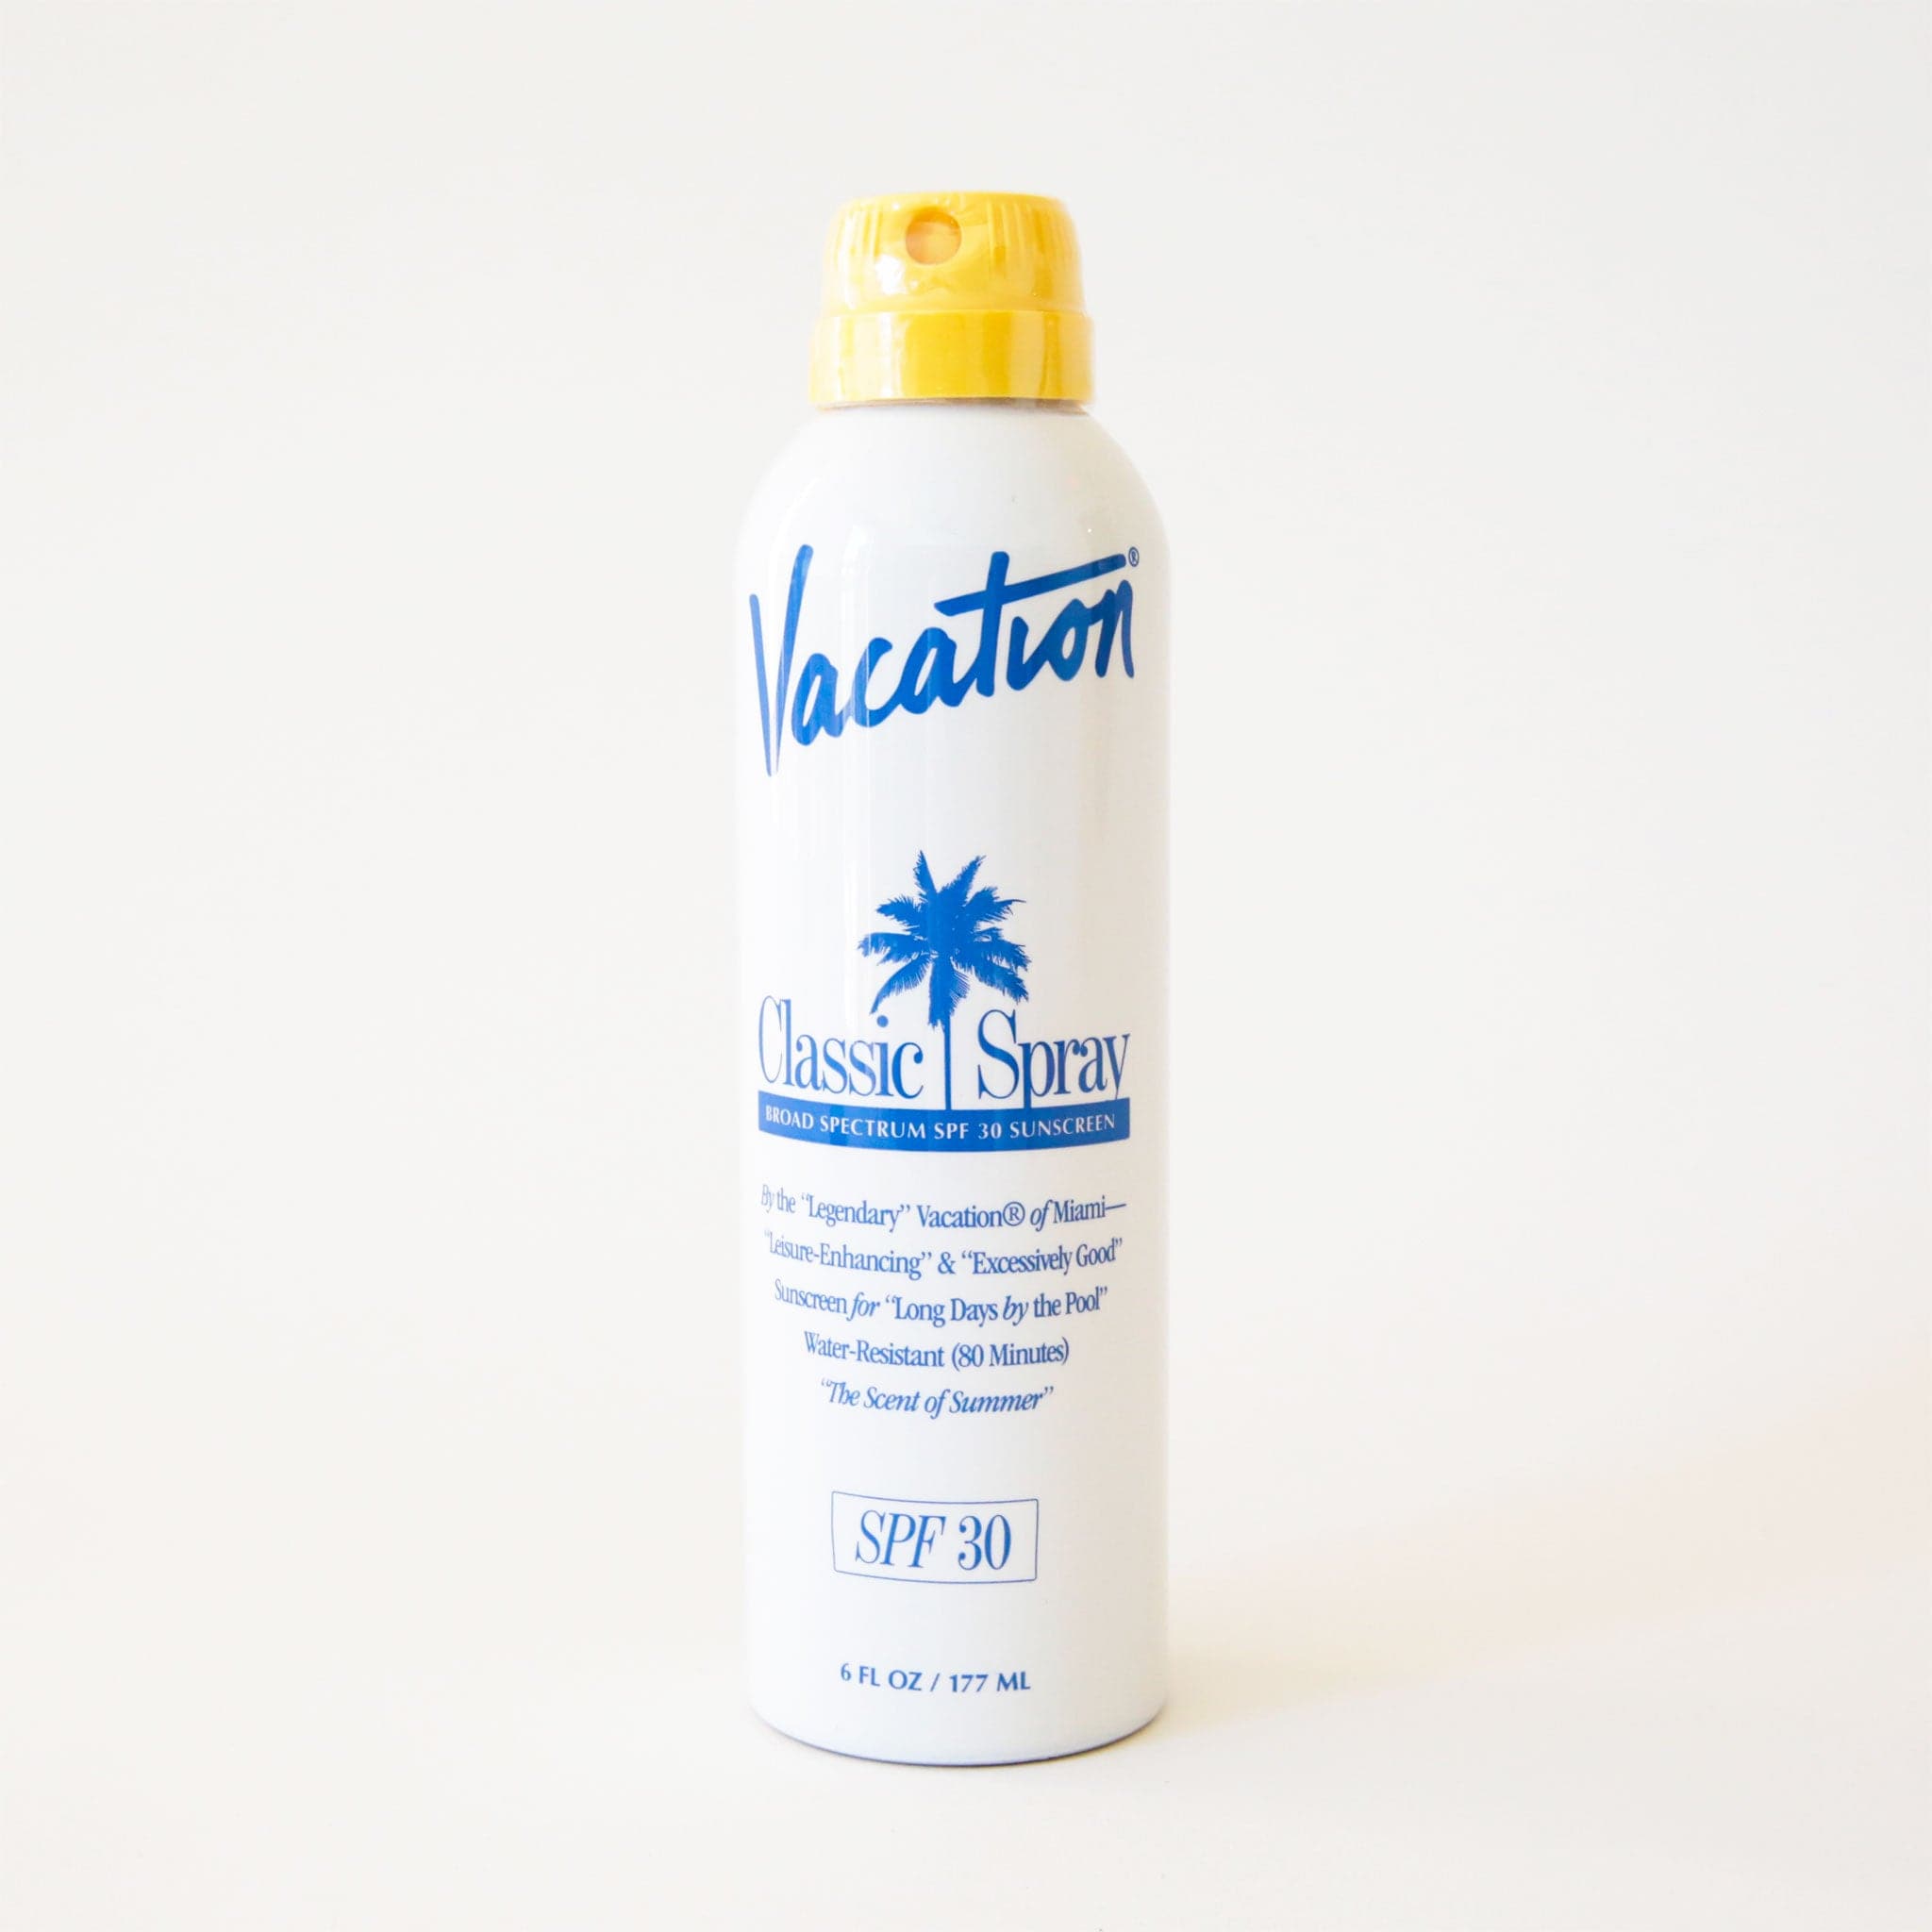 White glossy bottle of spray sunscreen. The bottle reads &#39;Vacation, Classic Spray, Broad Spectrum SPF 30 Sunscreen&#39; in blue lettering. The bottle is complete with a yellow spray cap. 